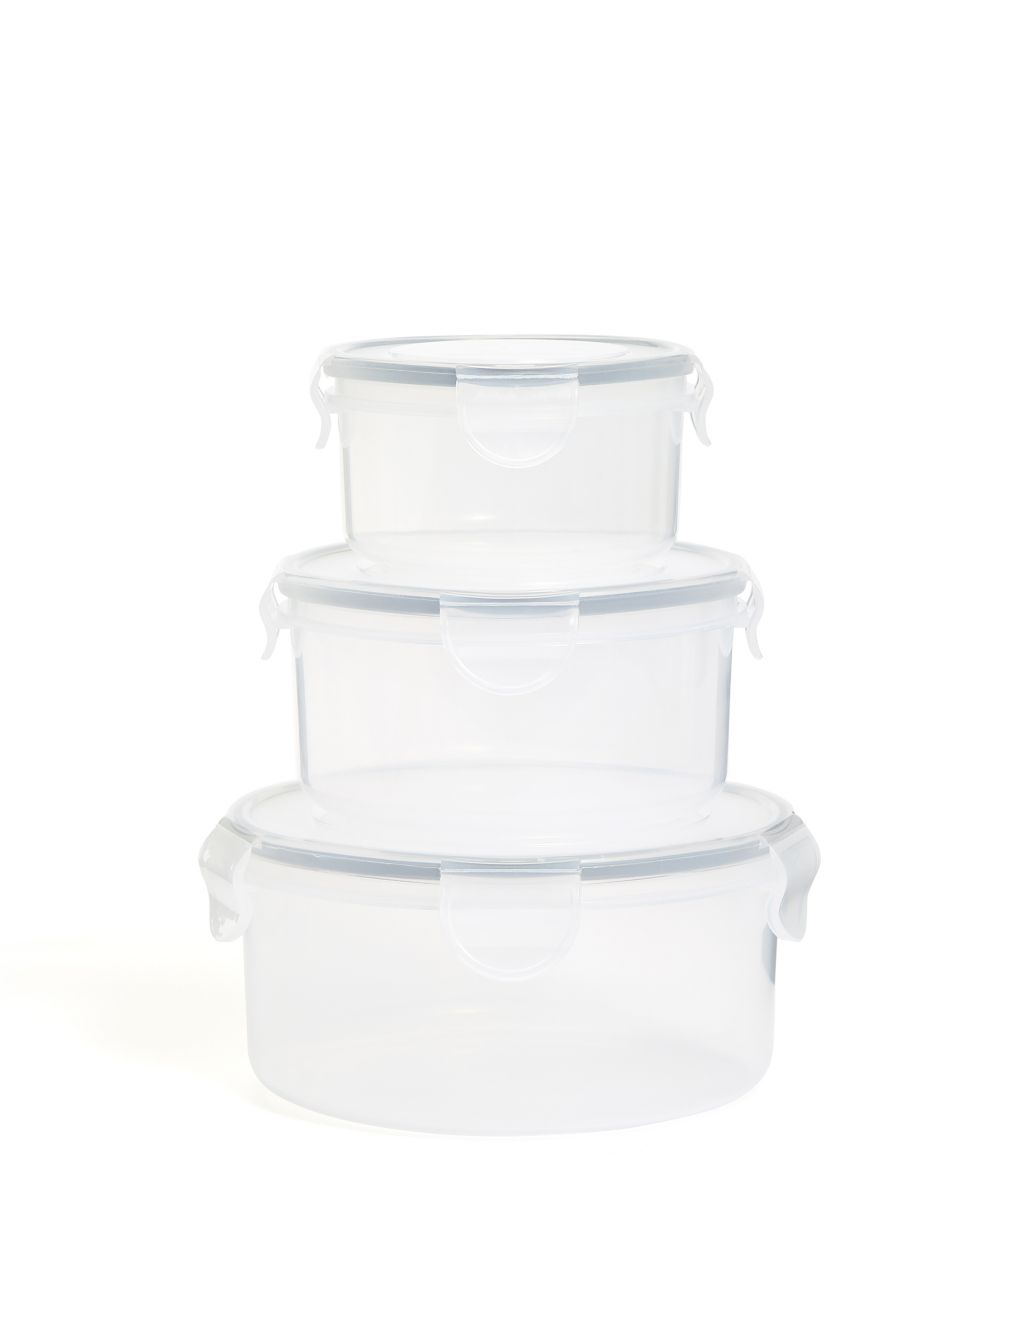 Set of 3 Round Clip Storage Containers